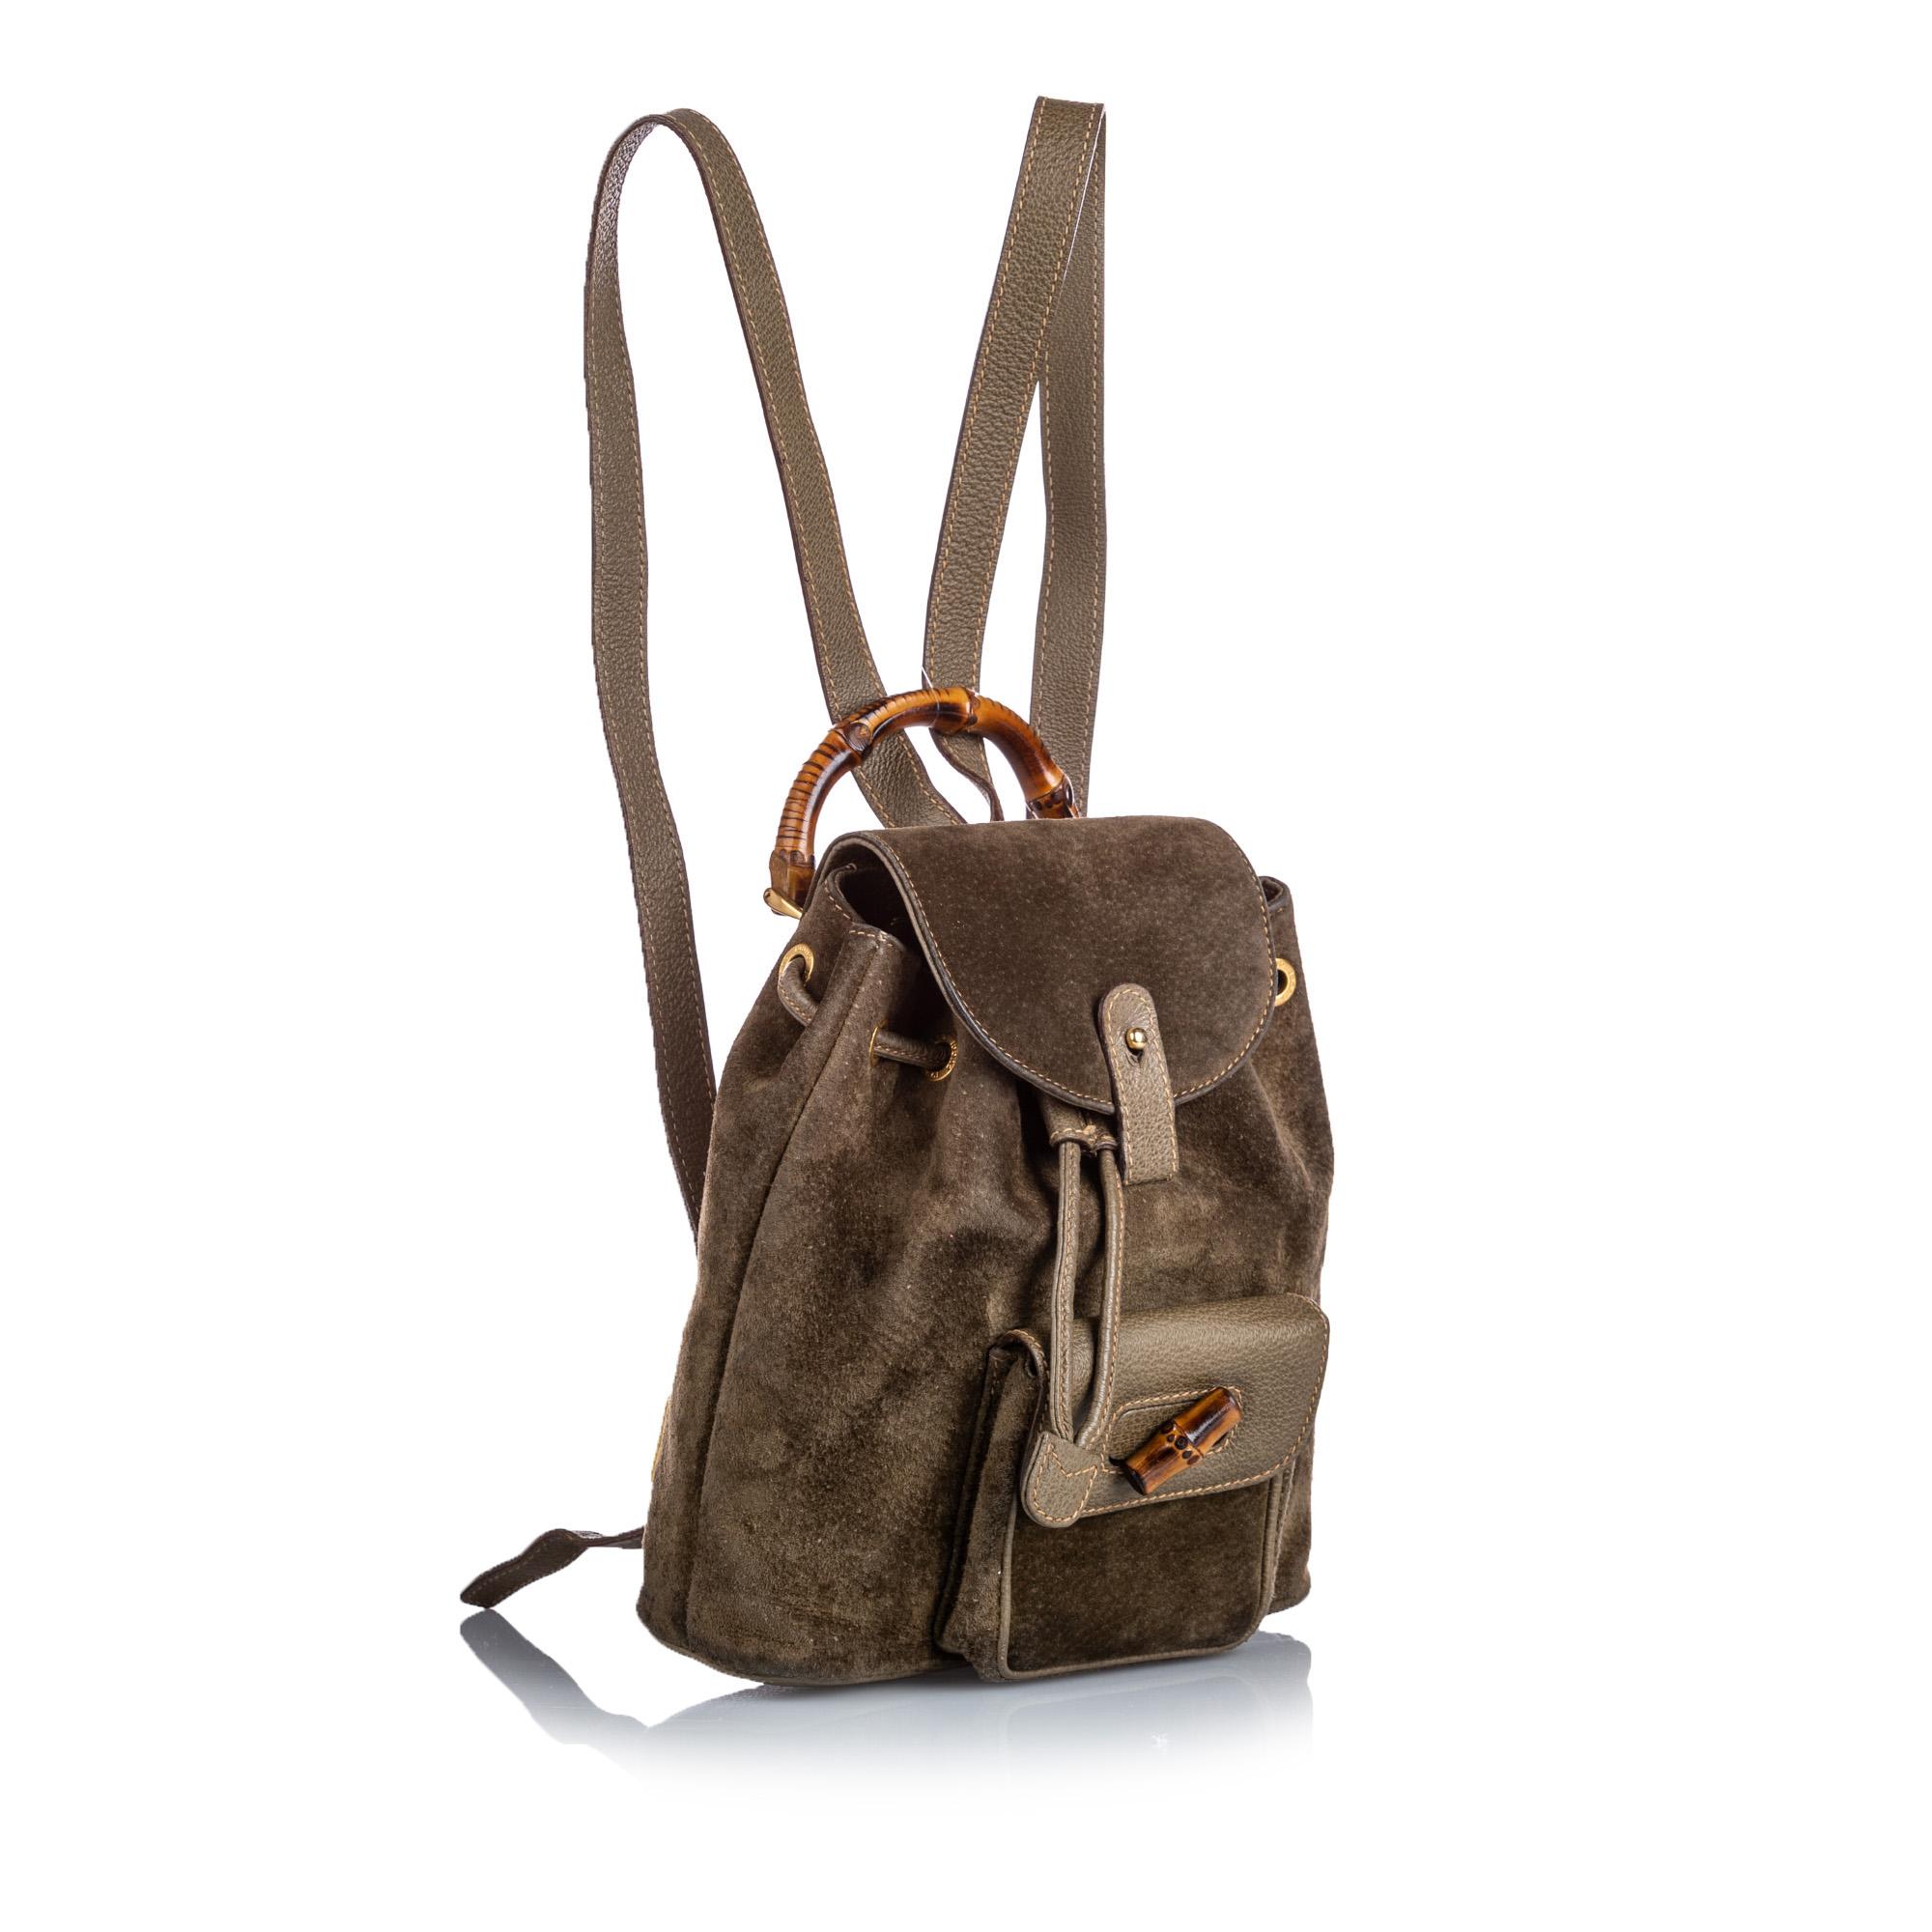 This backpack features a suede body, an exterior flap pocket with a bamboo twist lock closure, flat leather back straps, a bamboo top handle, a top flap with button closure, a drawstring closure, and an interior zip pocket. It carries as B condition